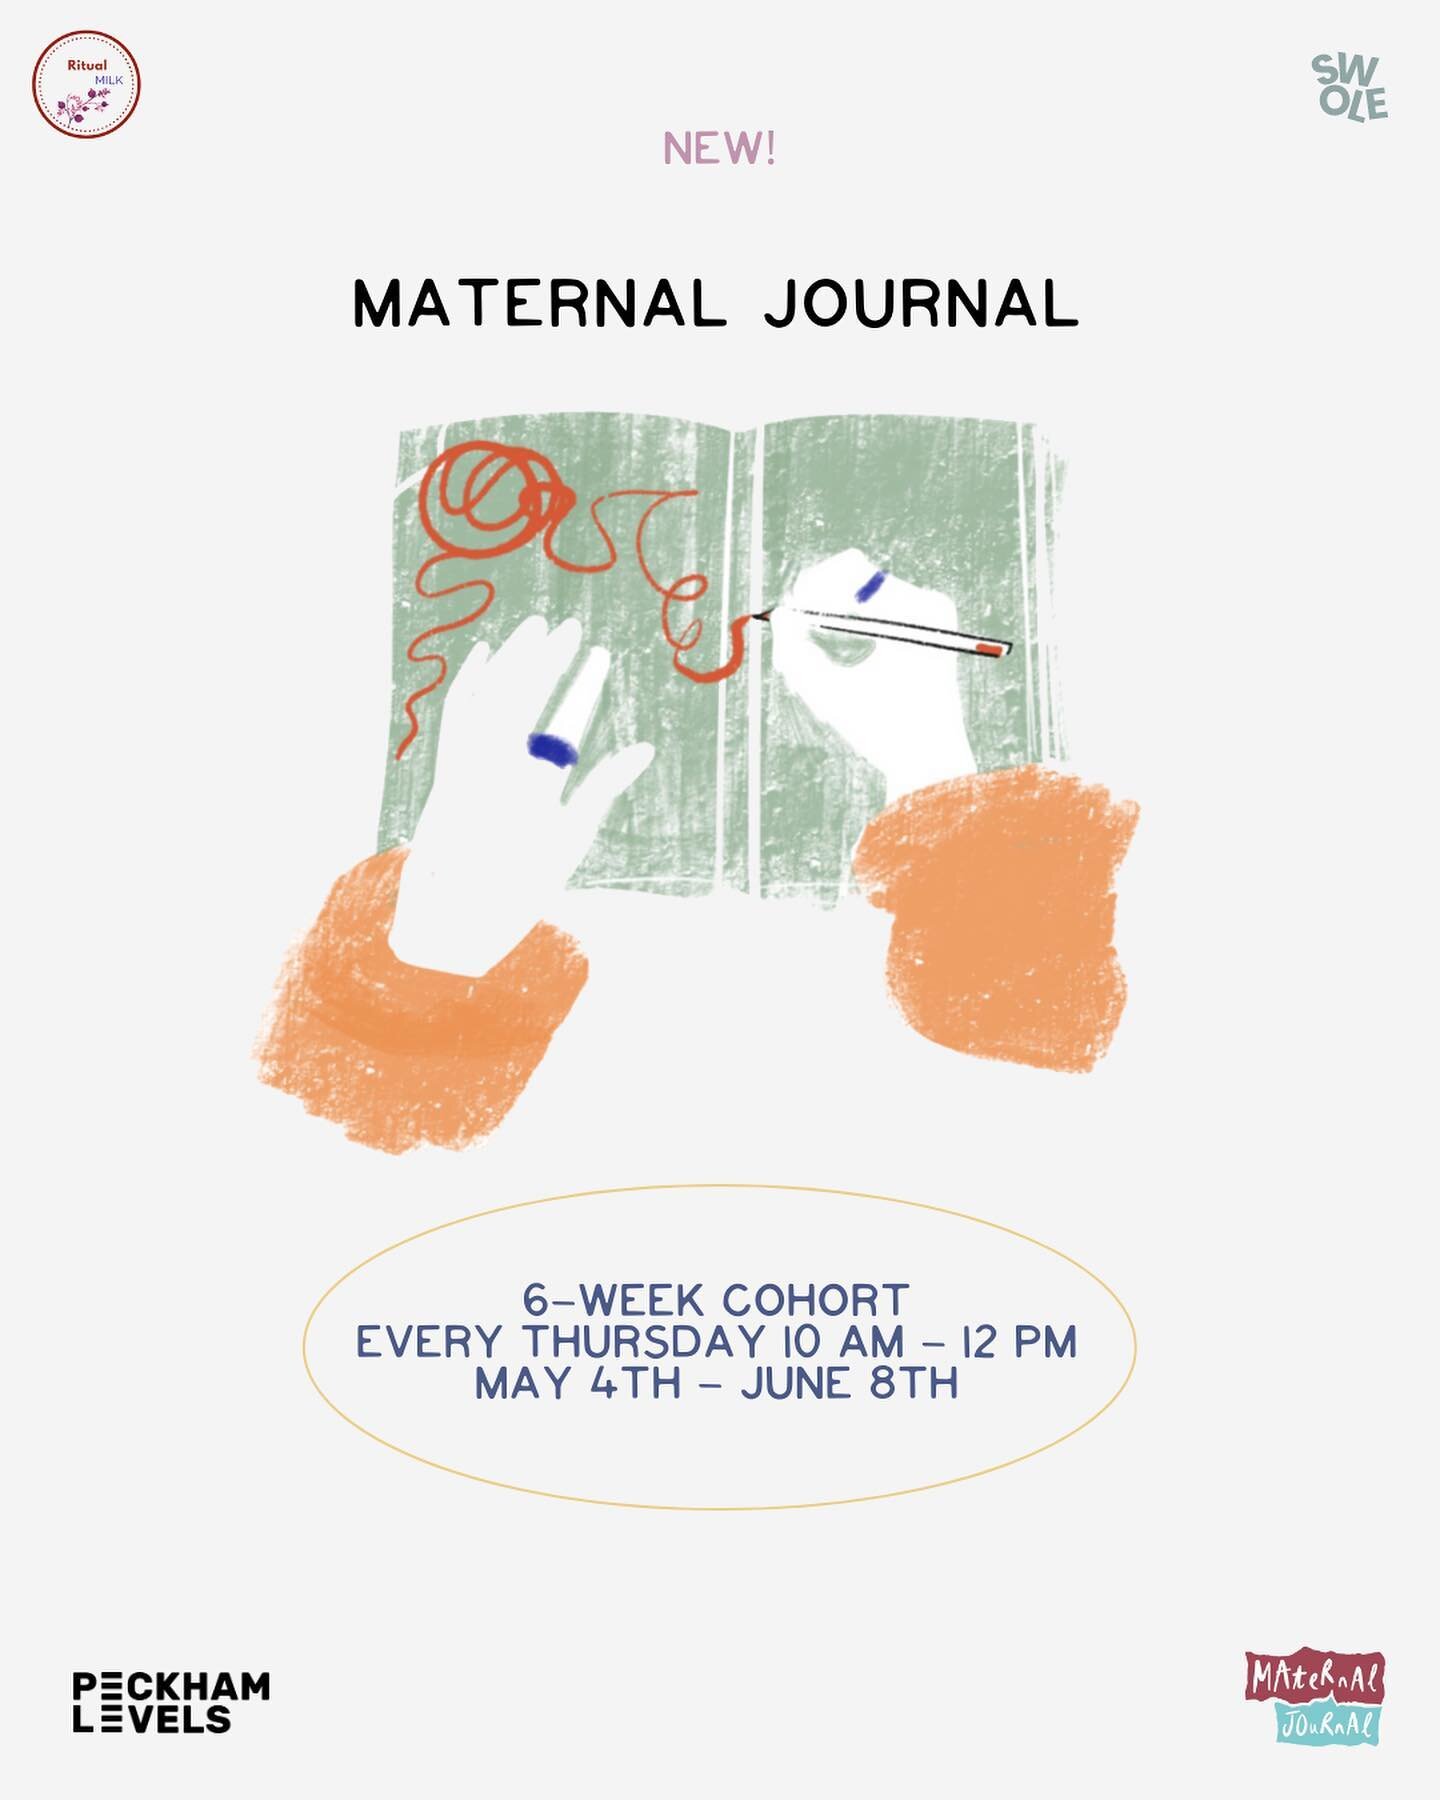 Maternal Journal is coming to Peckham!

Our first cohort will run for 6 weeks - every Thursday 4th May - 8th June, 10am-12pm 🗓

What is Maternal Journal?
MJ is a space in which creative journaling is used to boost wellbeing in pregnancy, birth and p